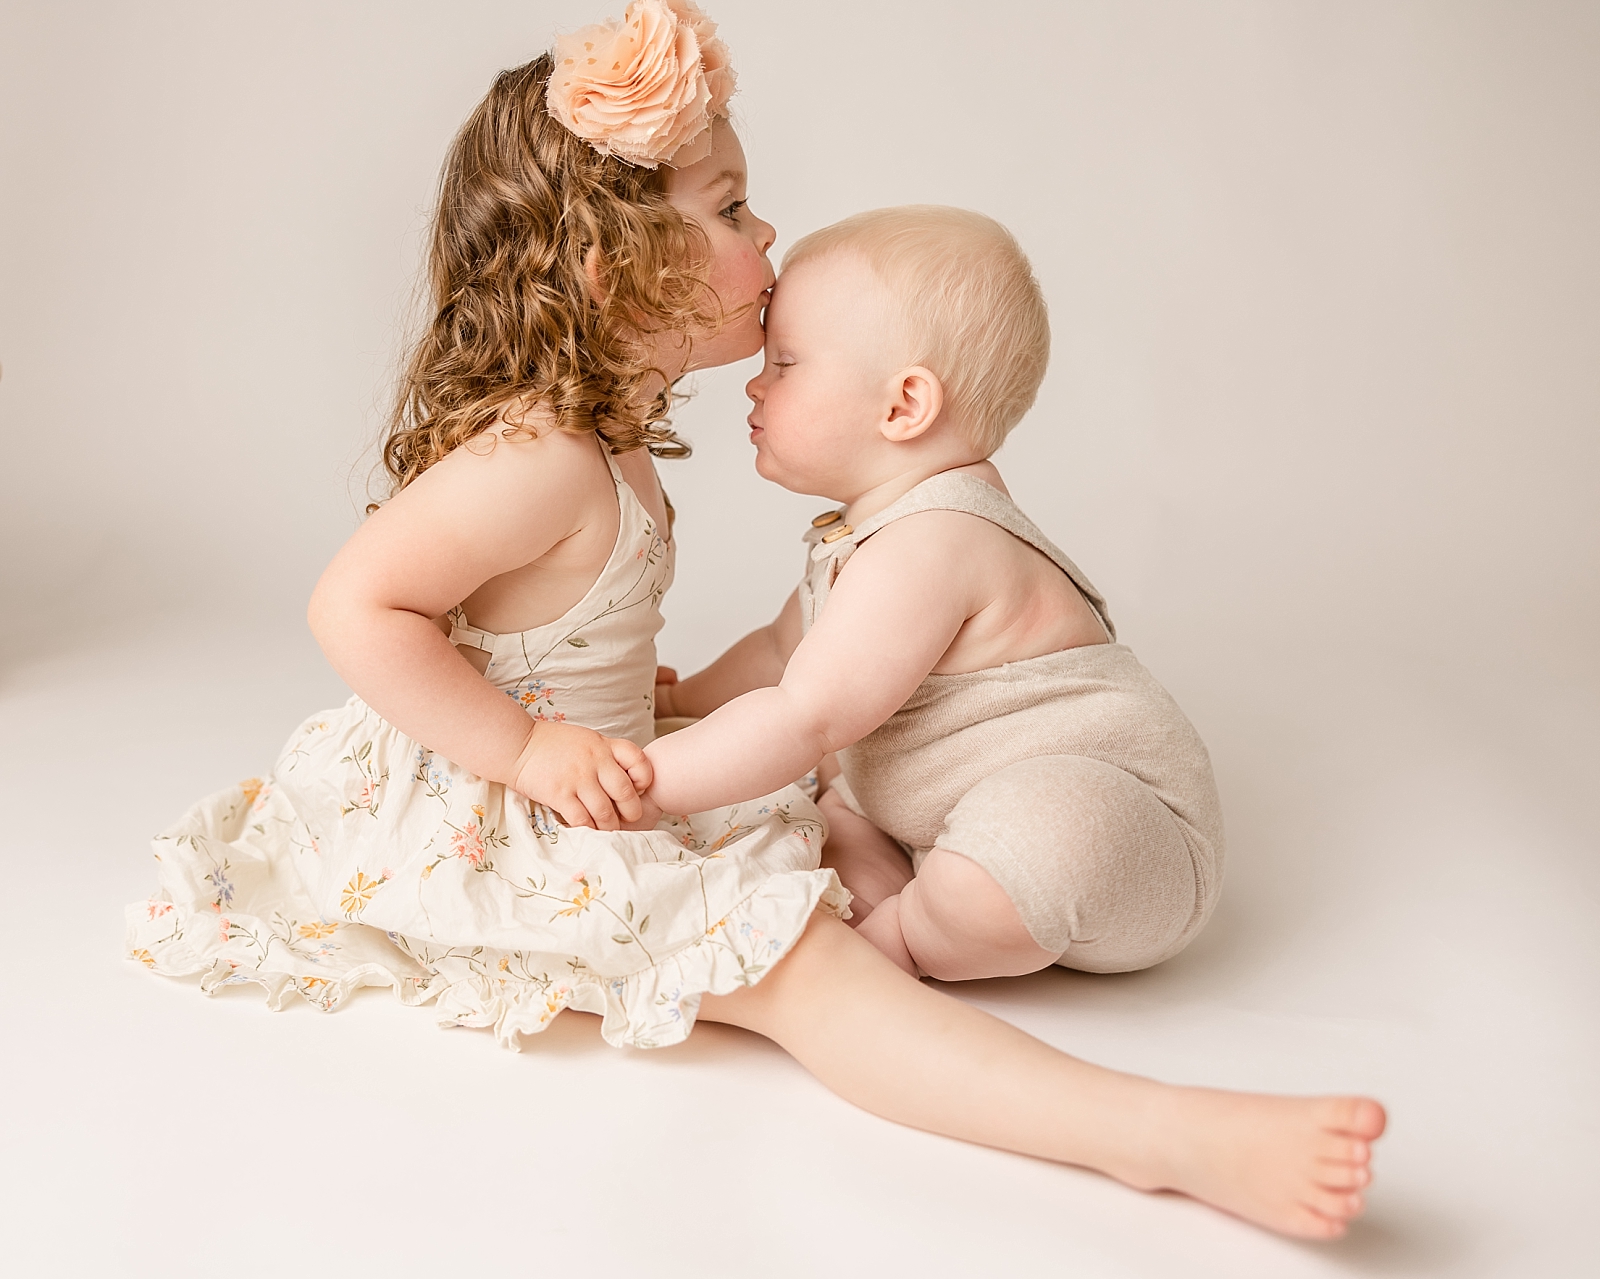 young girl kissing her baby brother on the forehead